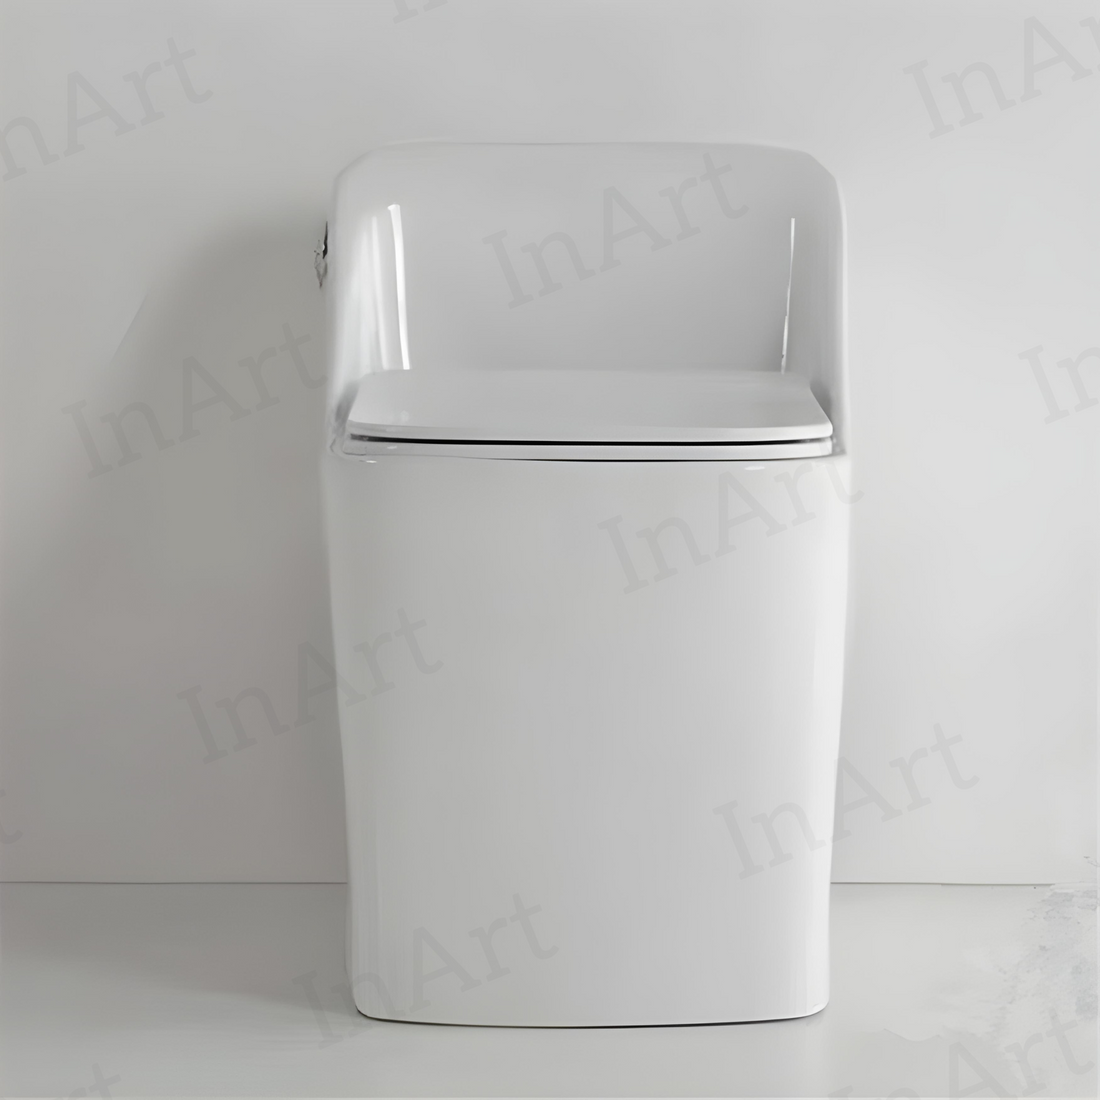 InArt Platinum Ceramic Rimless One-Piece Western Toilet with Soft Close Seat, S Trap Outlet, Glossy White - 67x41x60 cm - InArt-Studio